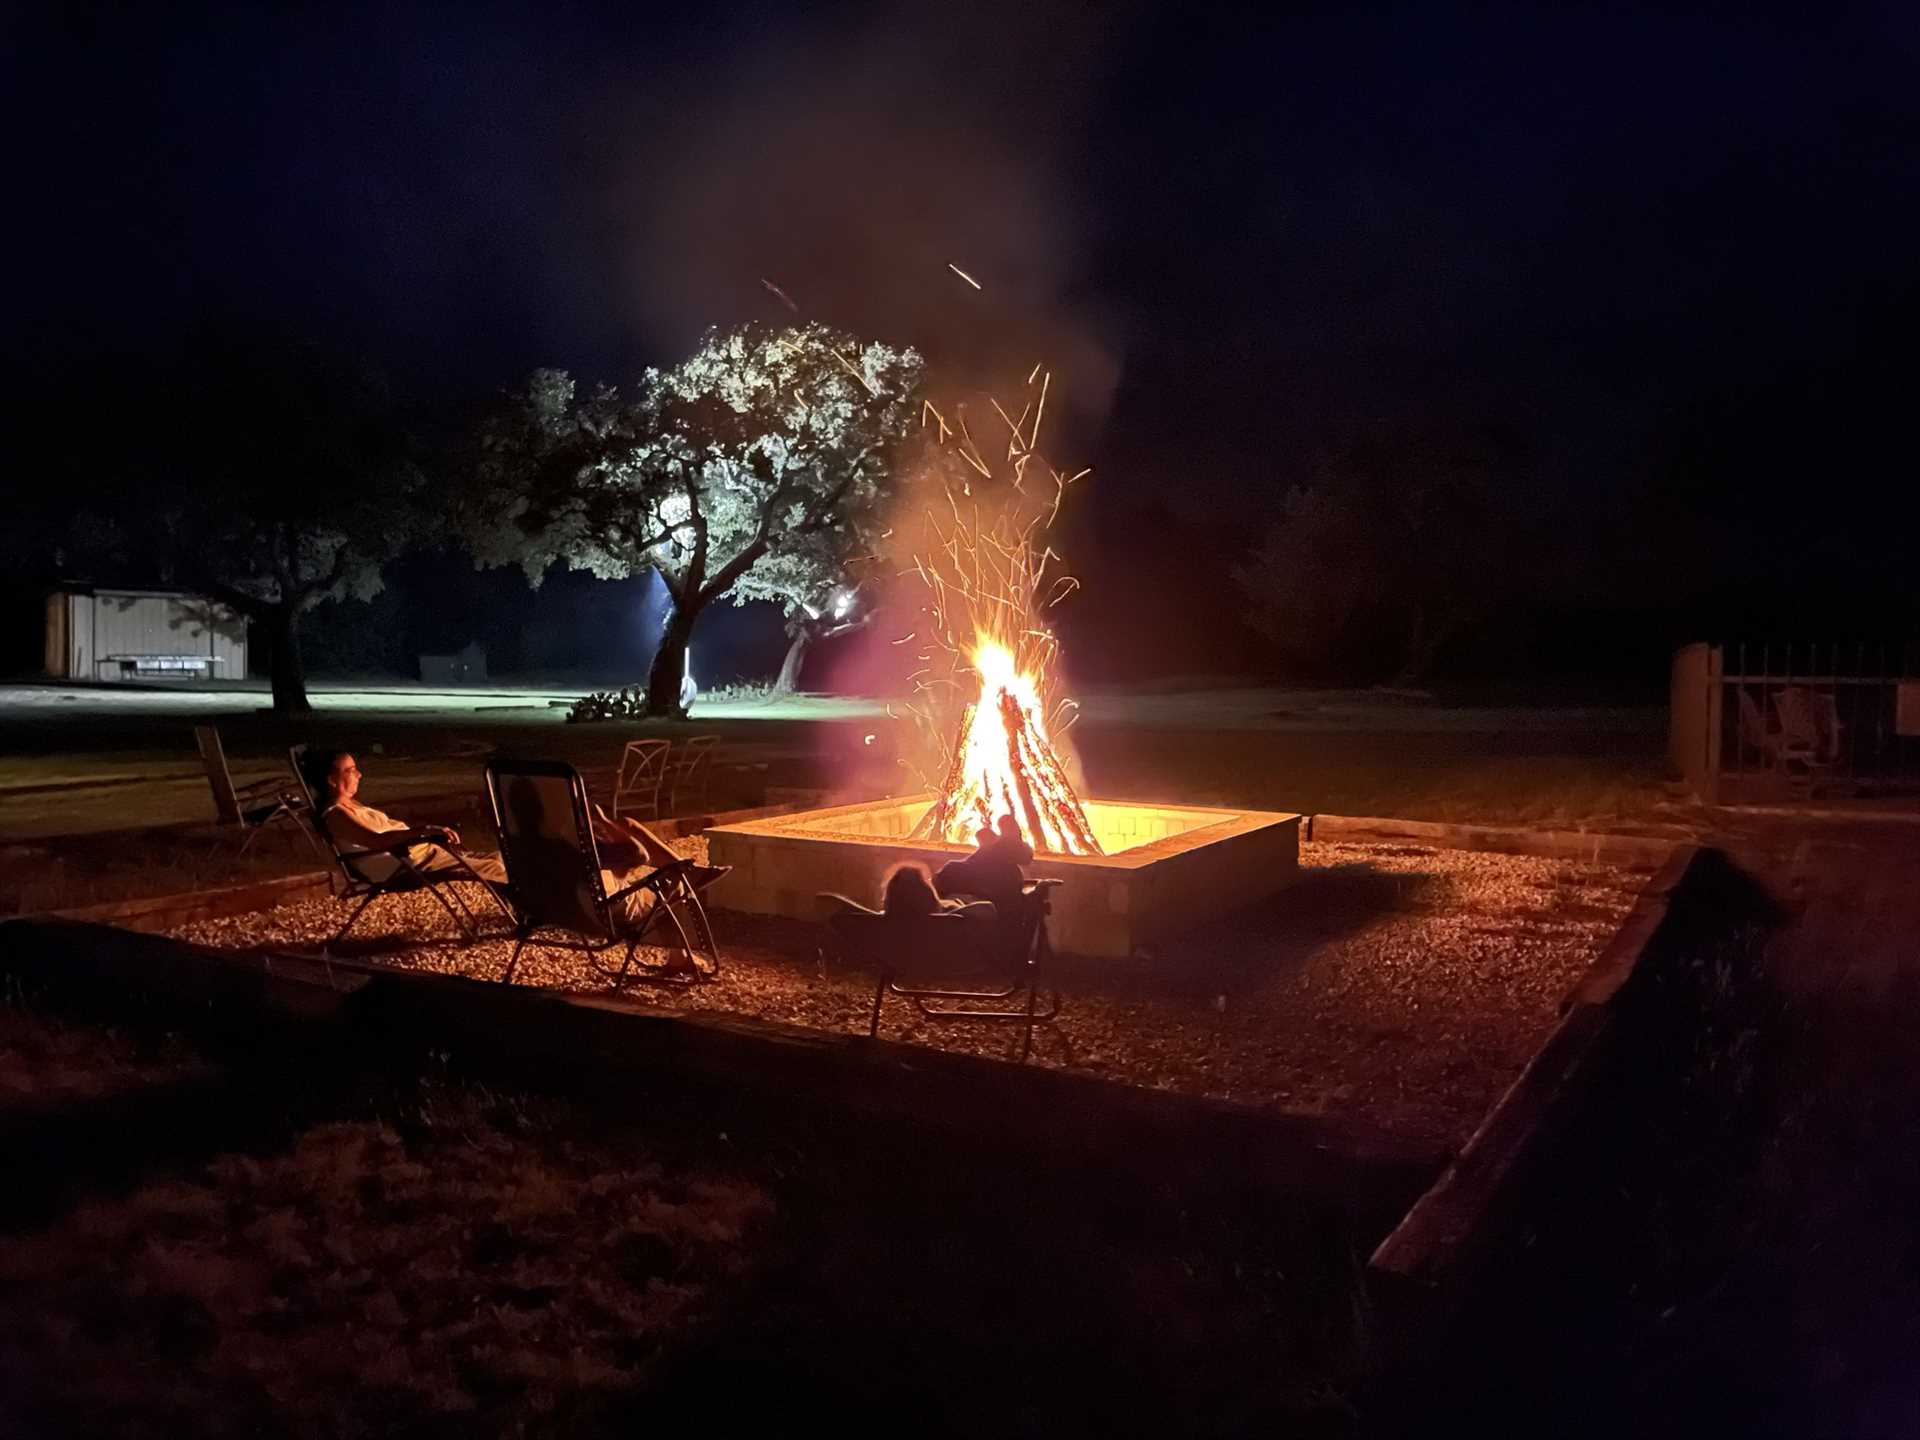                                                 Enjoy snacks and friendly conversation around the fire pit! This location is also incredible for wildlife watching and stargazing.